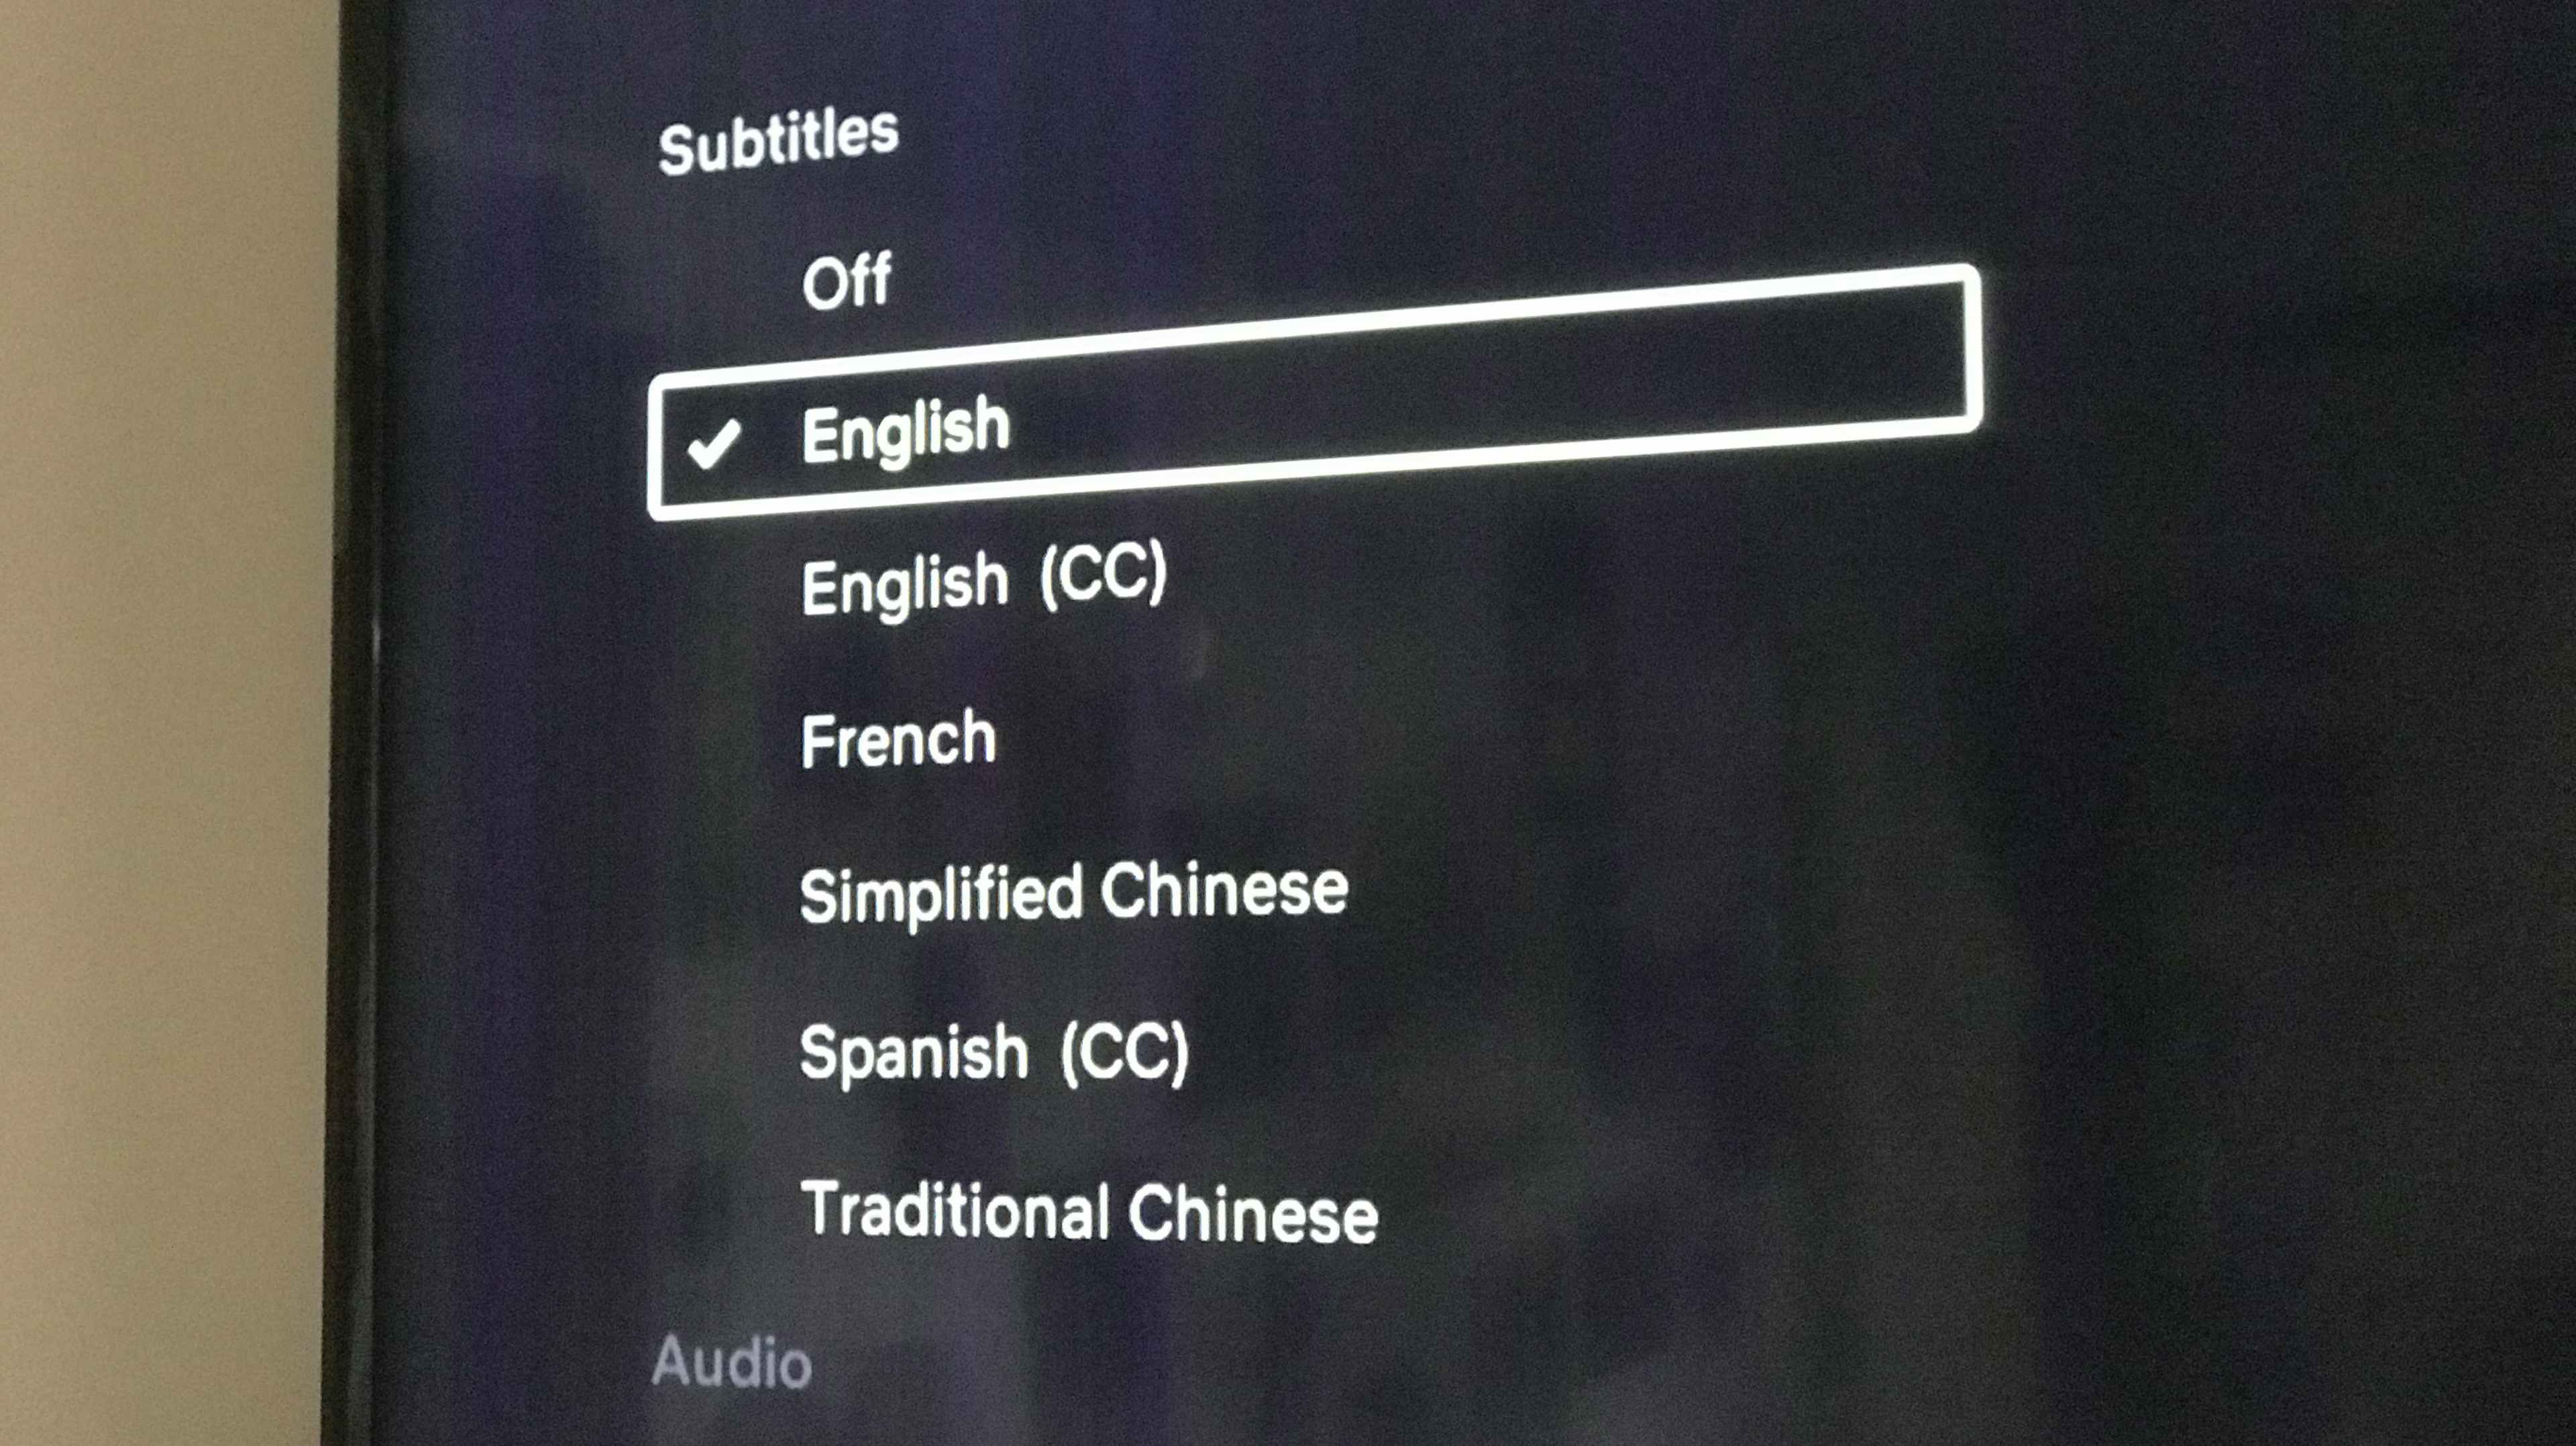 english subtitles selected on tv